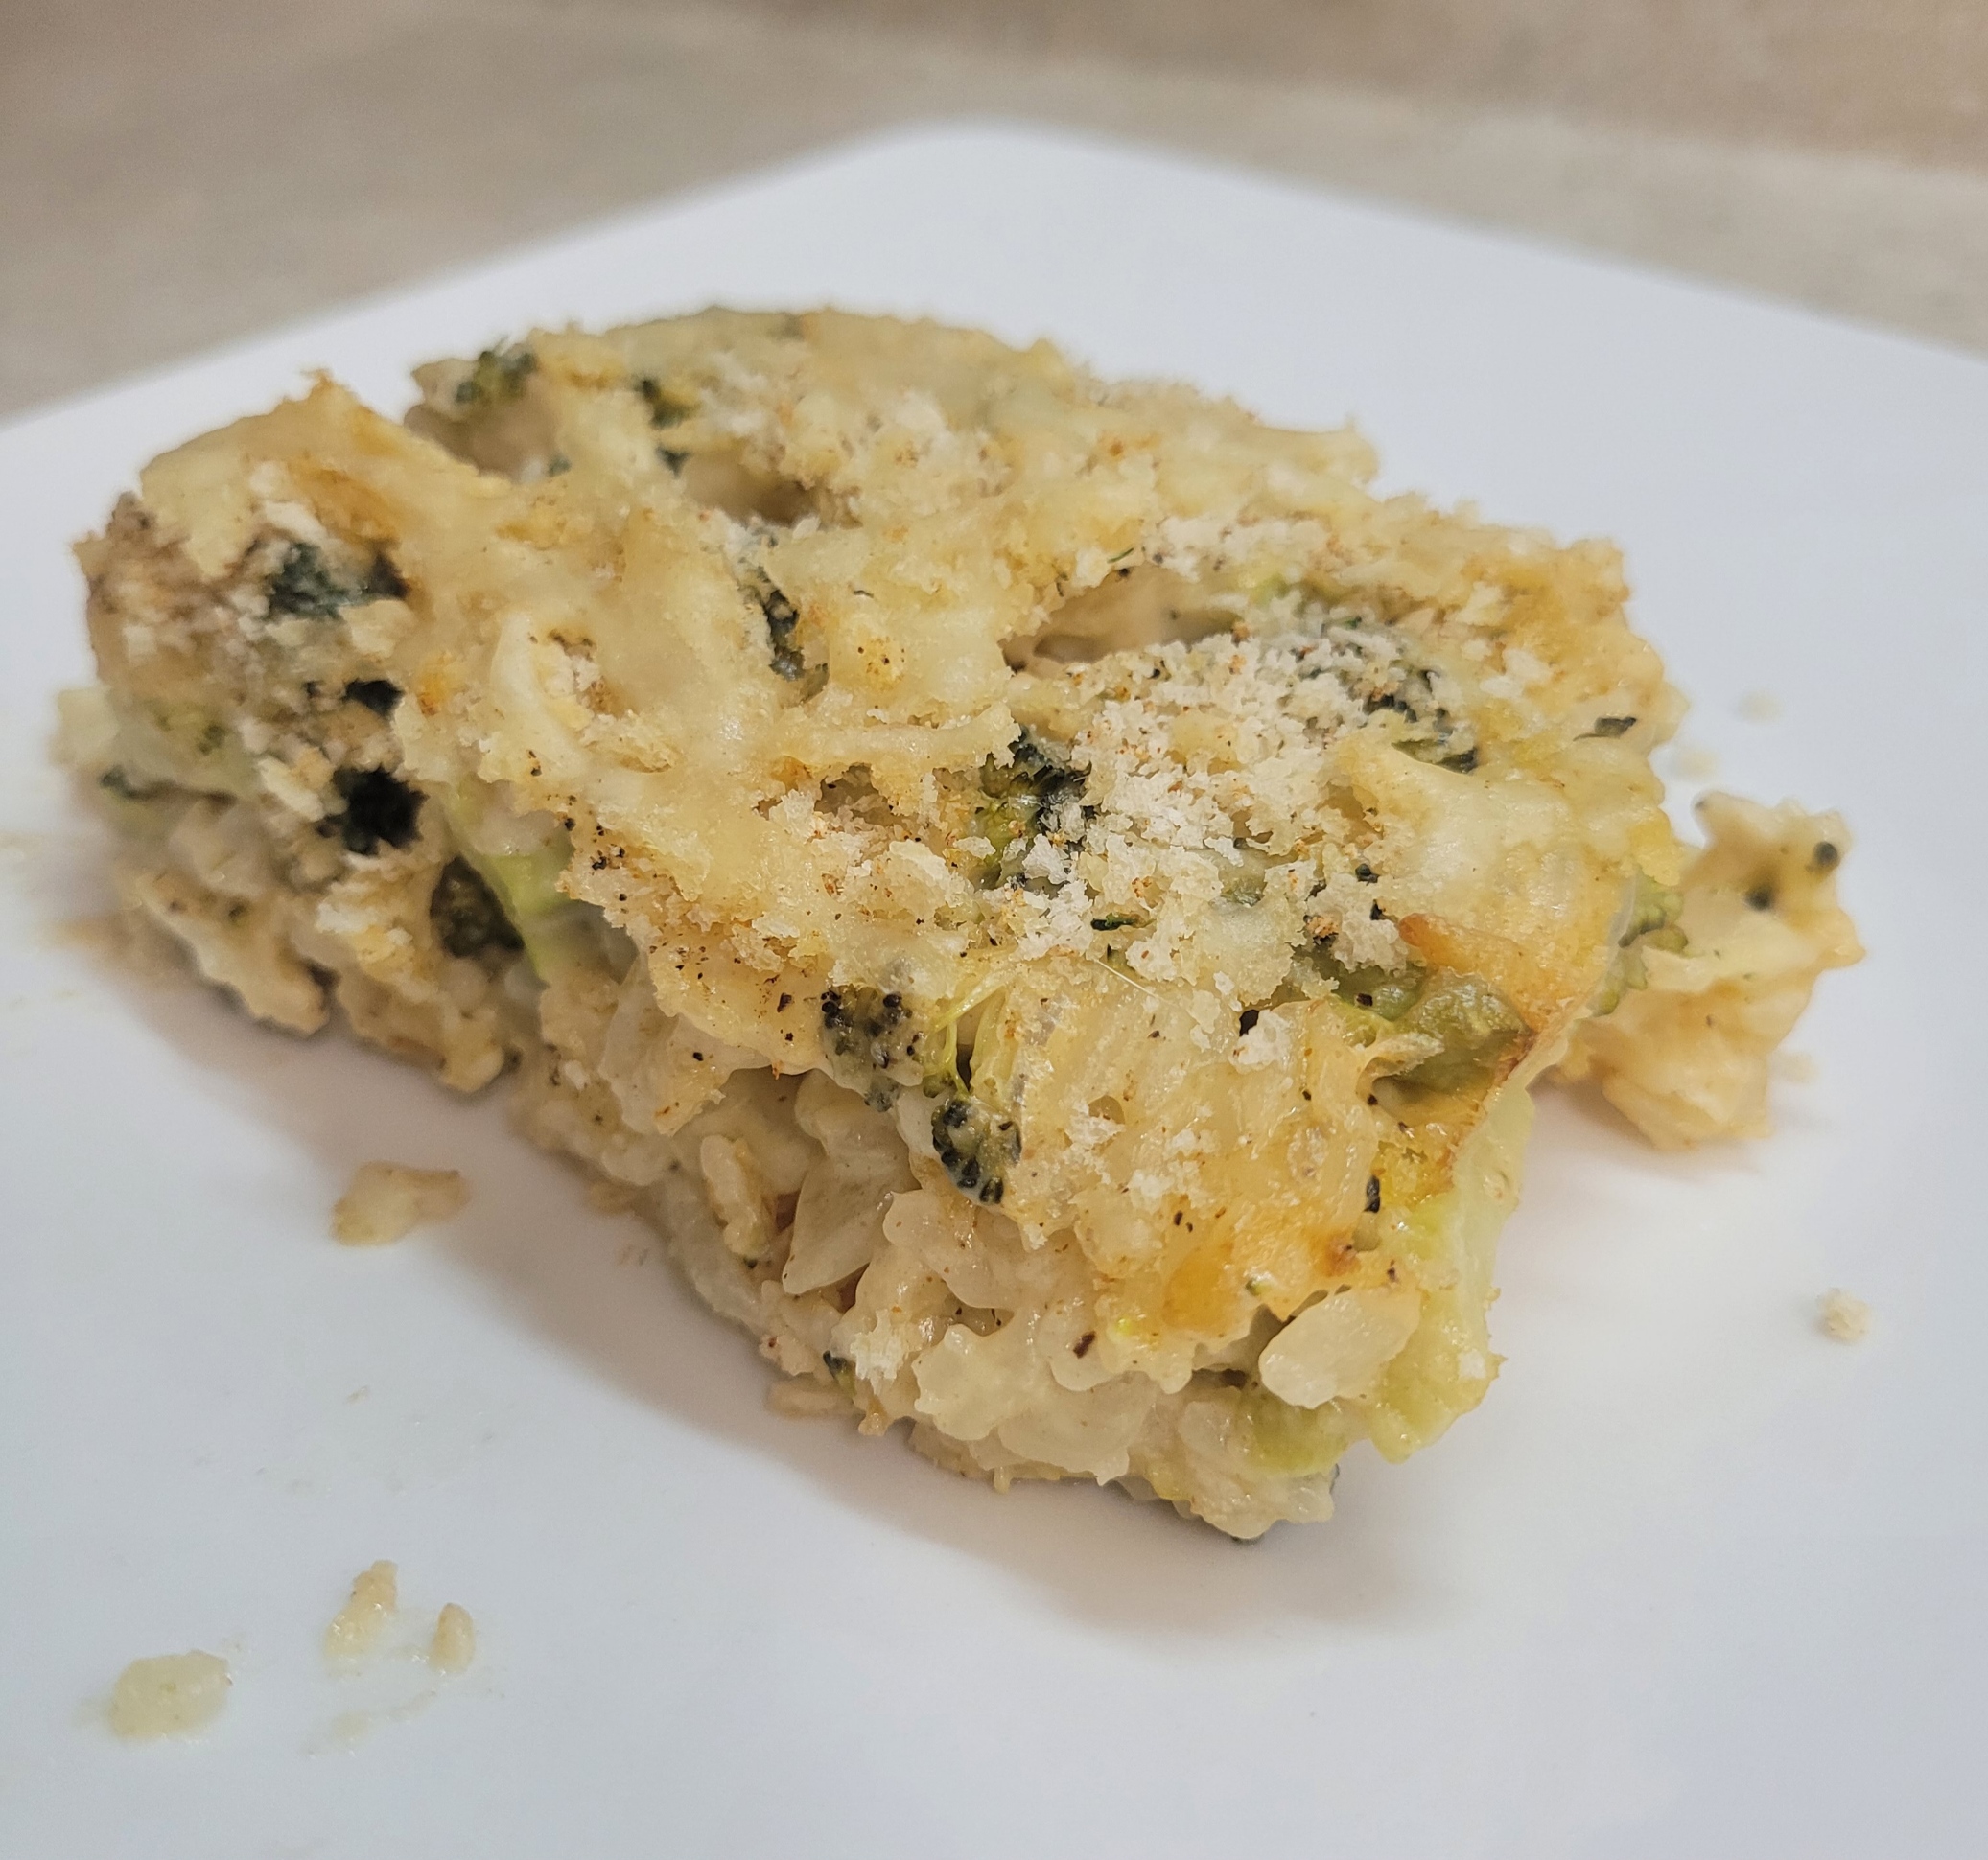 Go-To Cheesy Broccoli Rice Casserole (the second one), Challenge #5